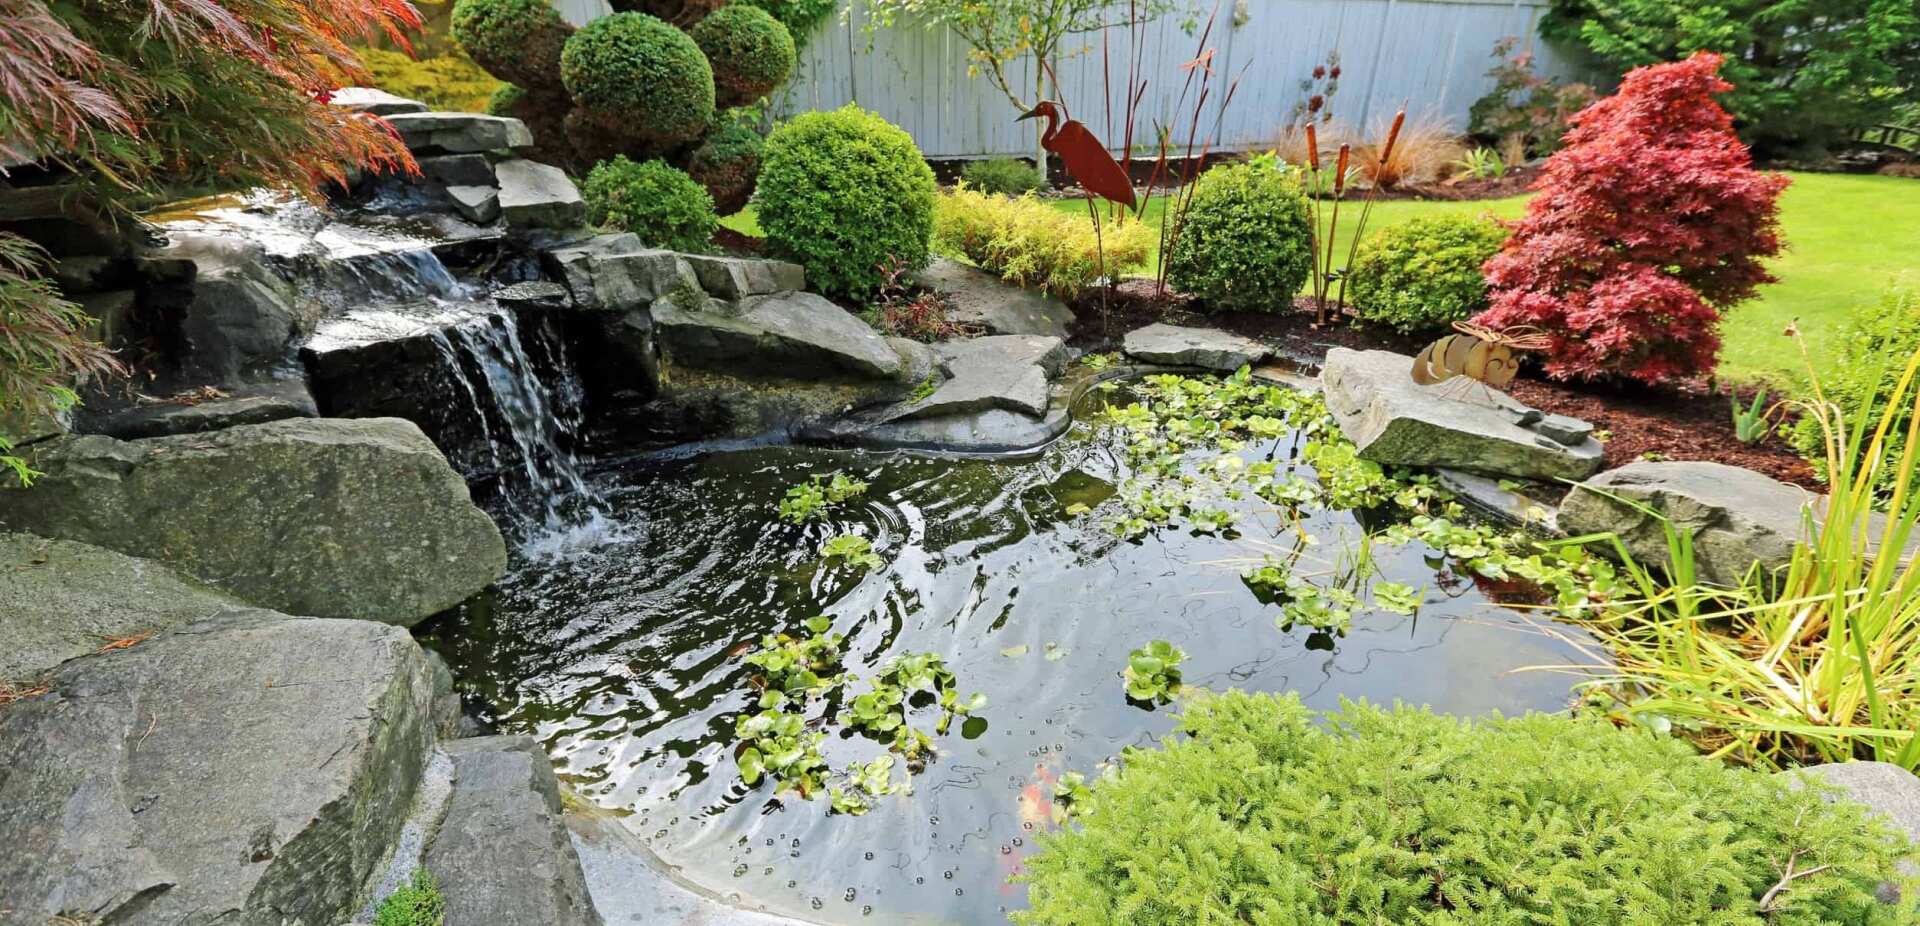 How to Implement Waterfall Features Into Your Backyard Pond